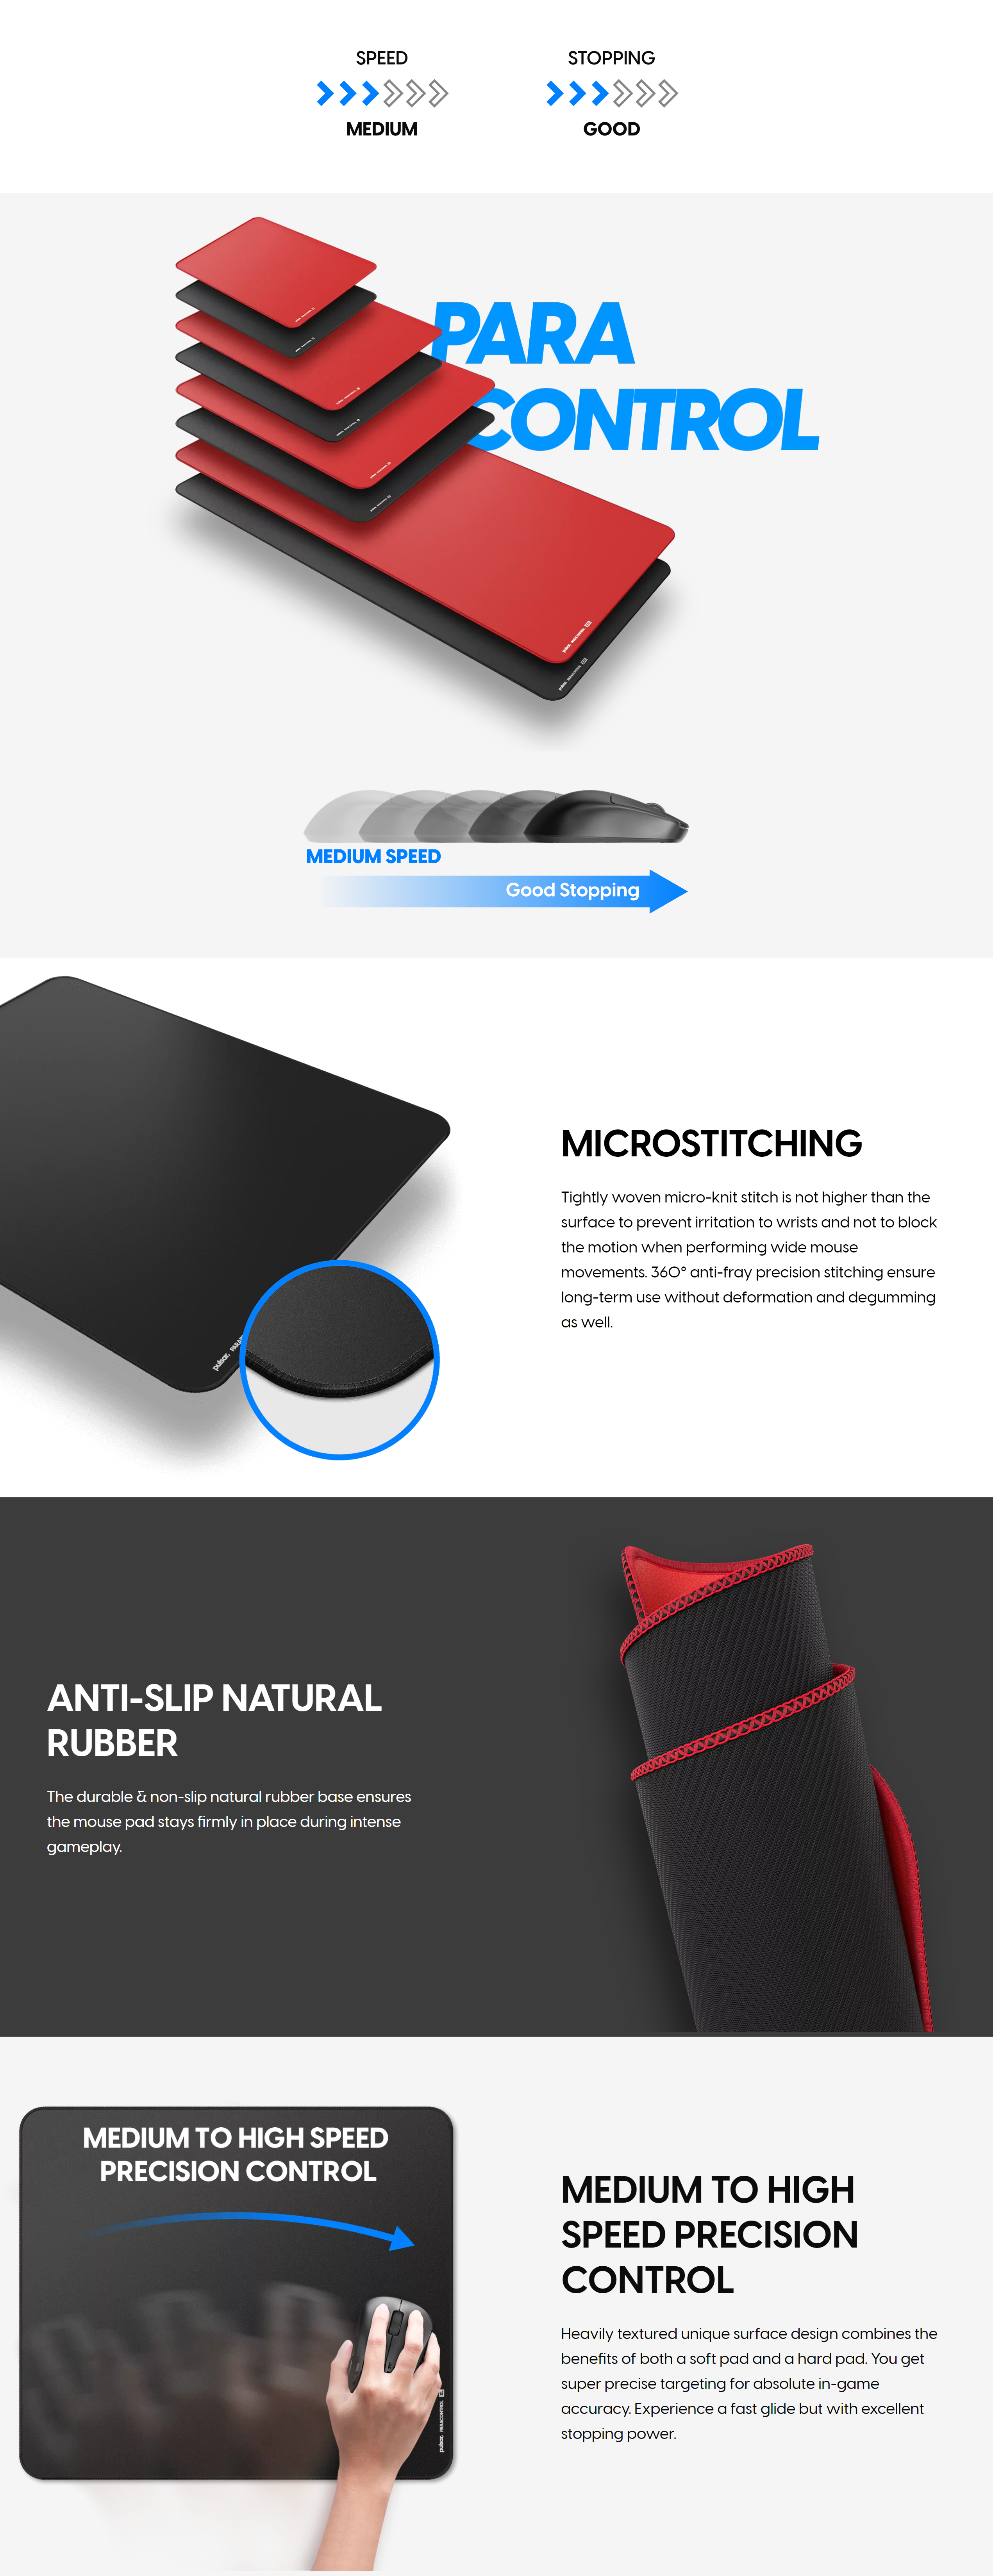 A large marketing image providing additional information about the product Pulsar Paracontrol V2 Mousemat Medium - Black - Additional alt info not provided